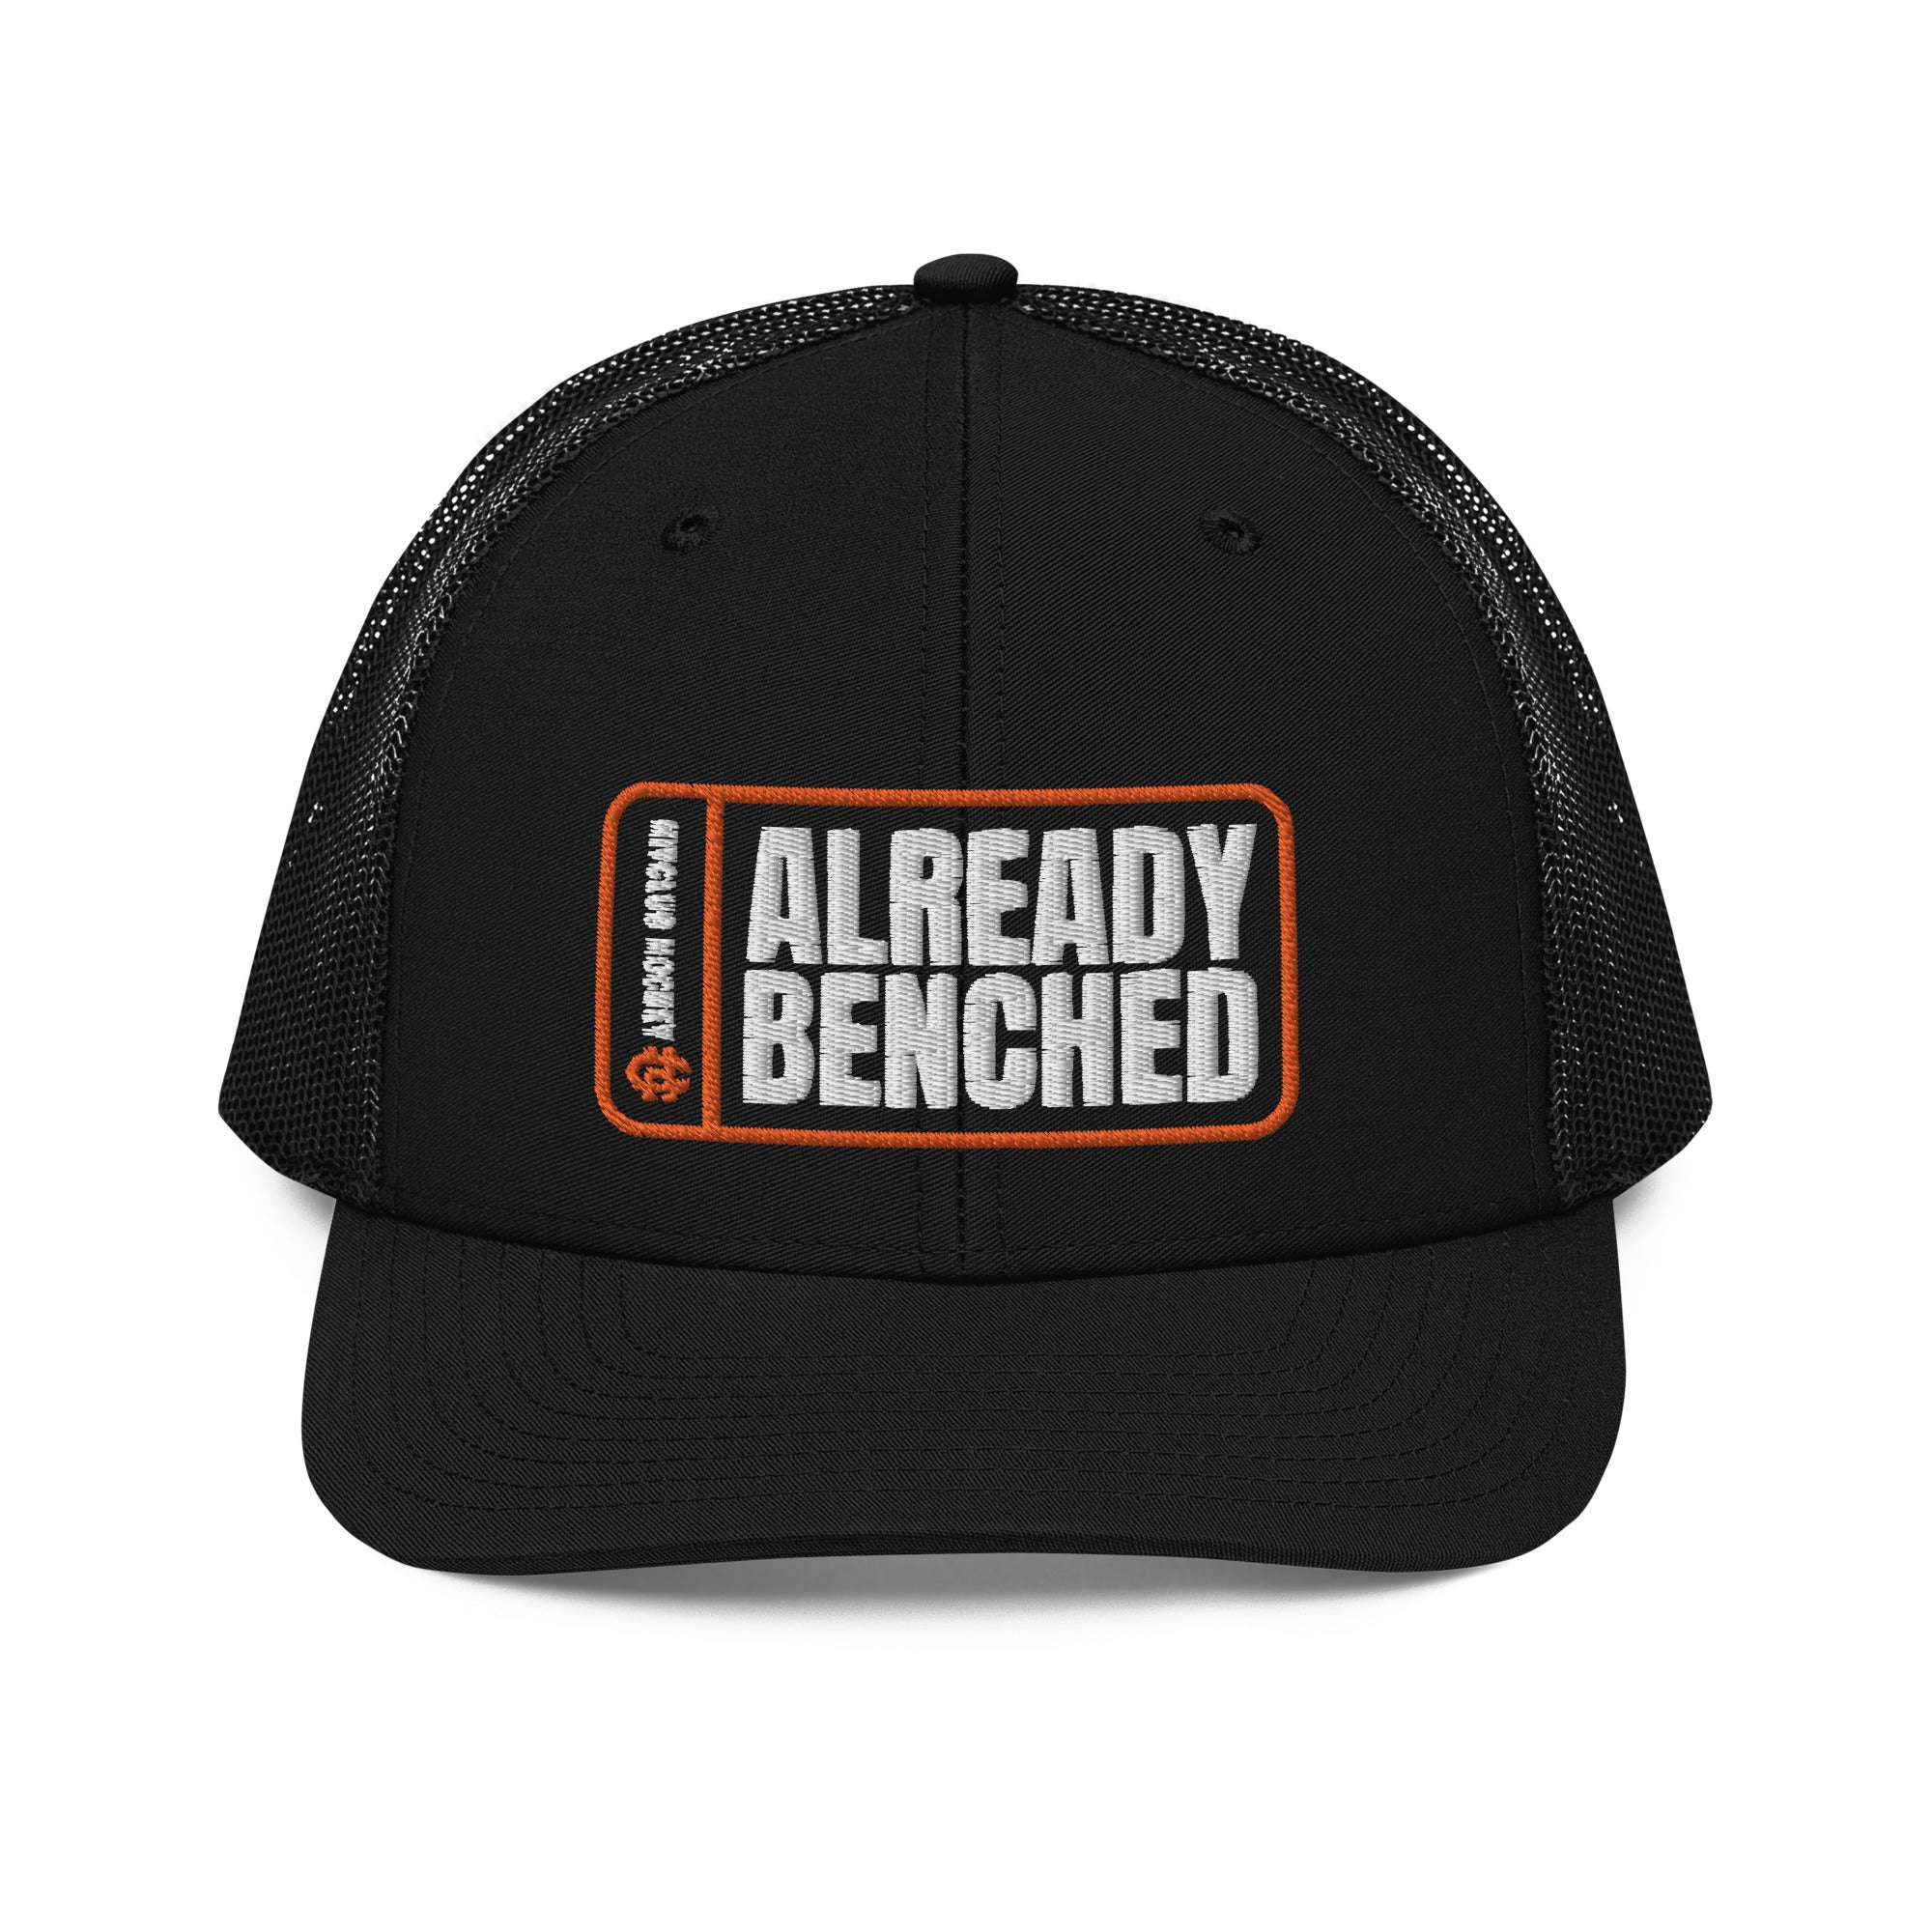 Already Benched – Trucker Hat